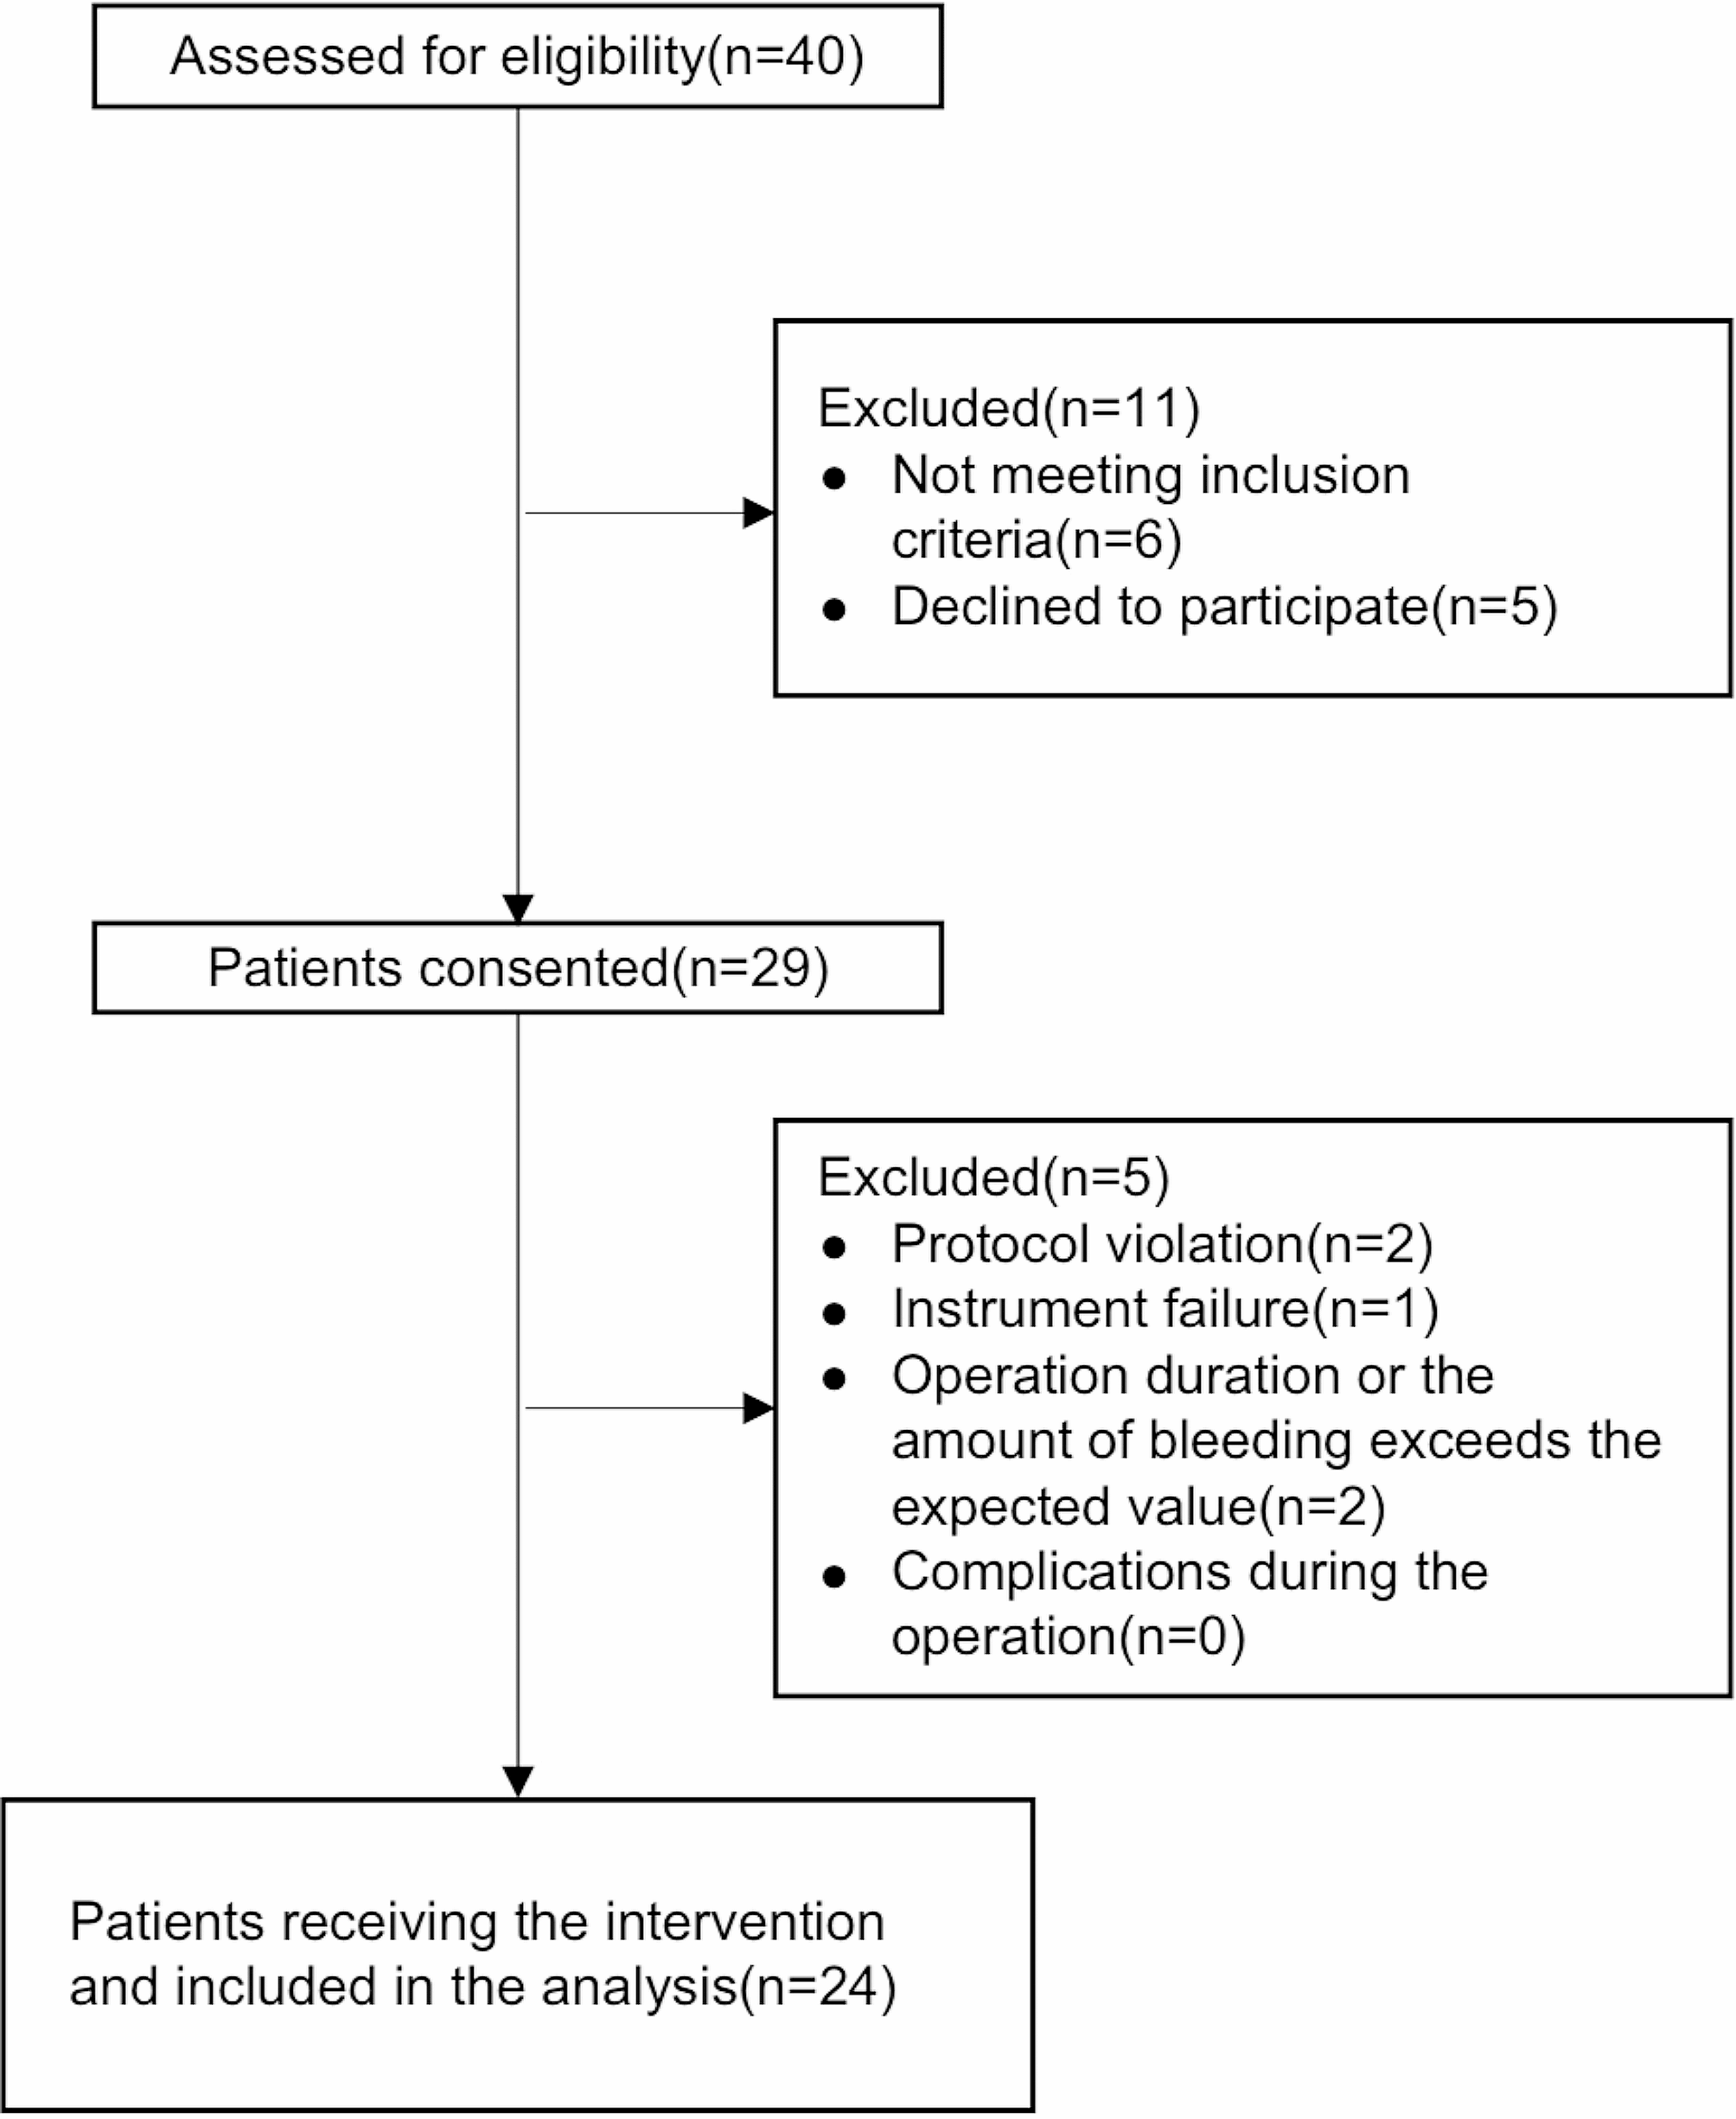 Optimizing nicardipine dosage for effective control of pituitrin-induced hypertension in laparoscopic myomectomy undergoing total intravenous anesthesia